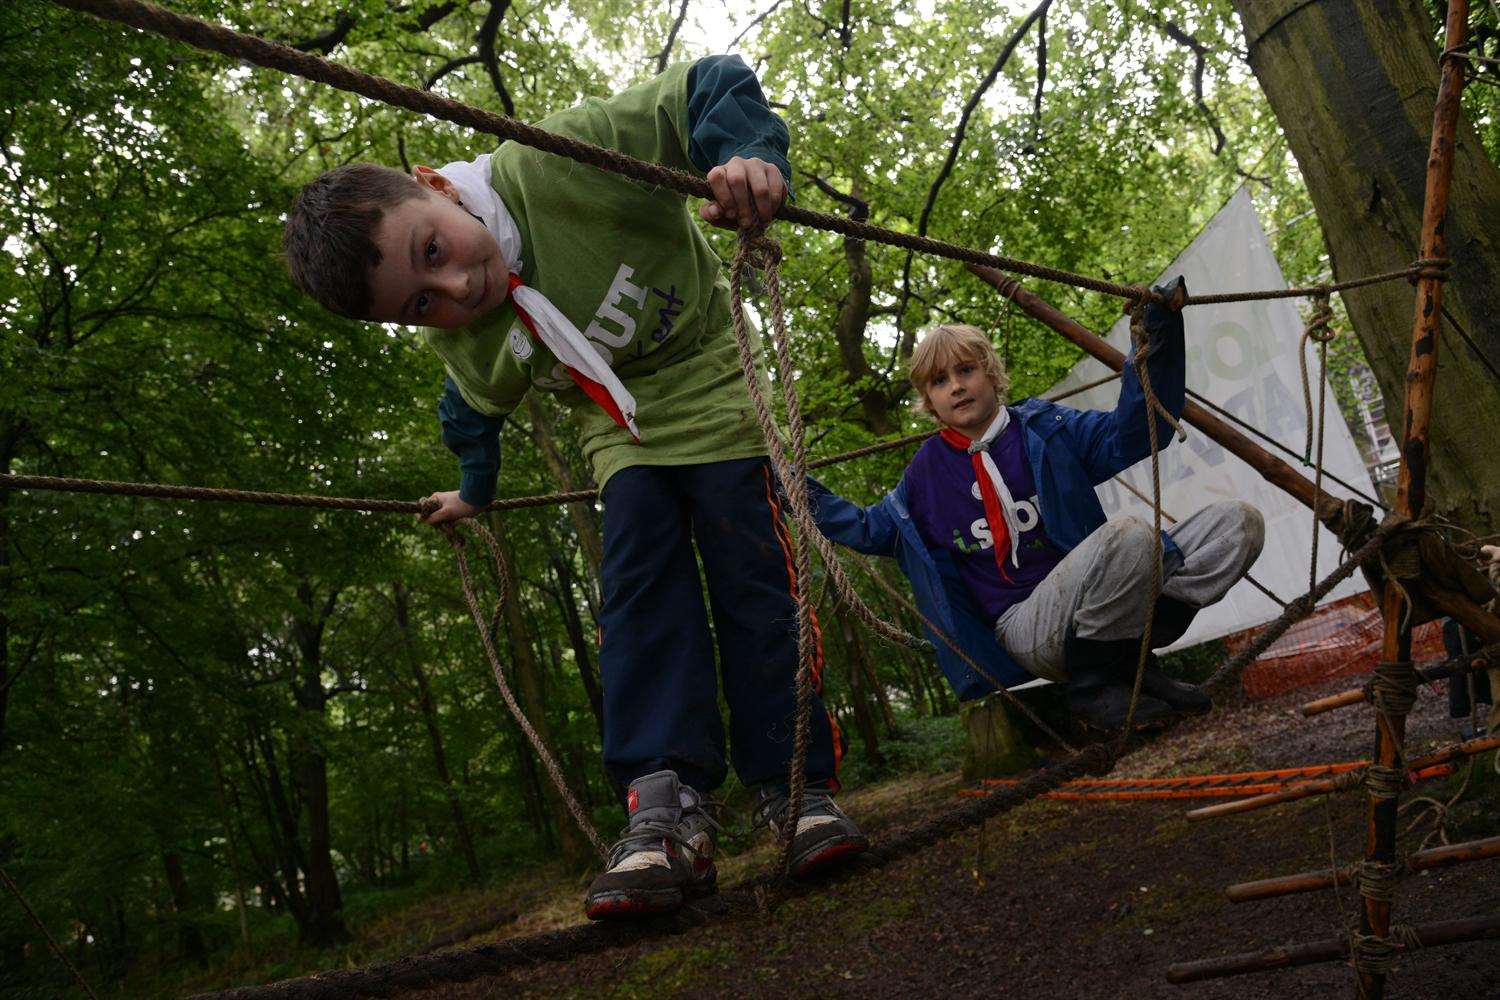 Josh Winfield and Jake Tinworth from St Luke's Scouts, Maidstone, in the woodland area at last year's show